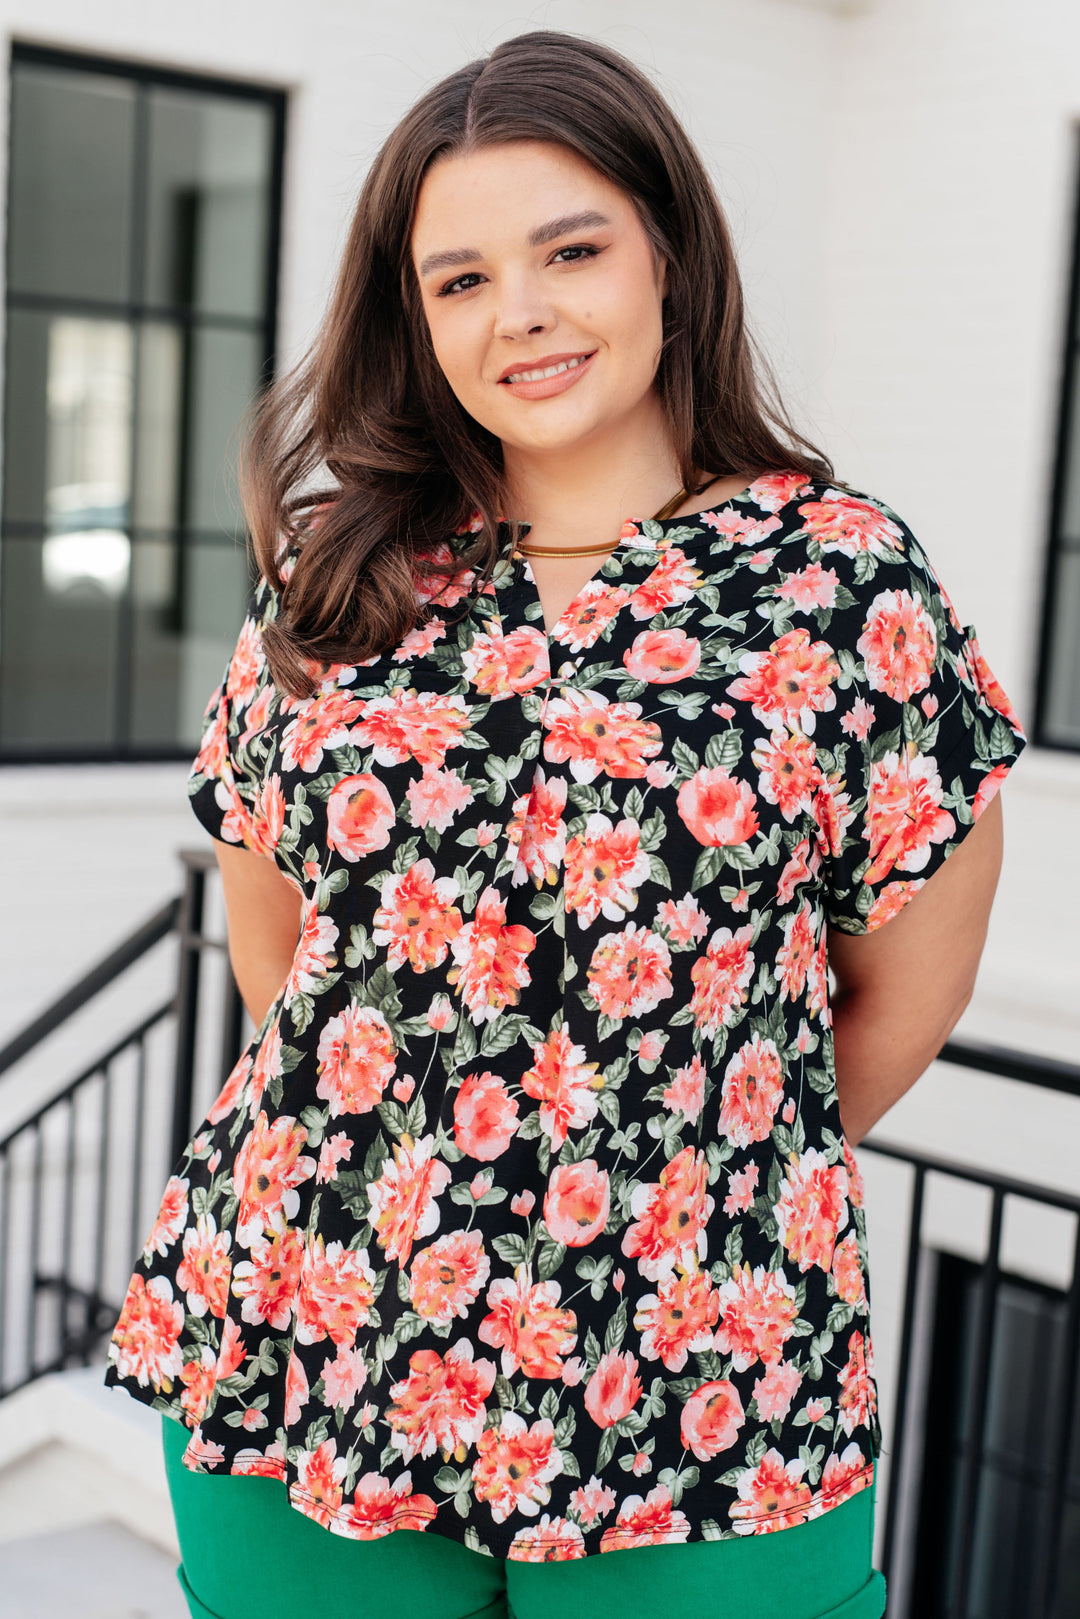 Lizzy Cap Sleeve Top in Black and Coral Floral-Short Sleeve Tops-Inspired by Justeen-Women's Clothing Boutique